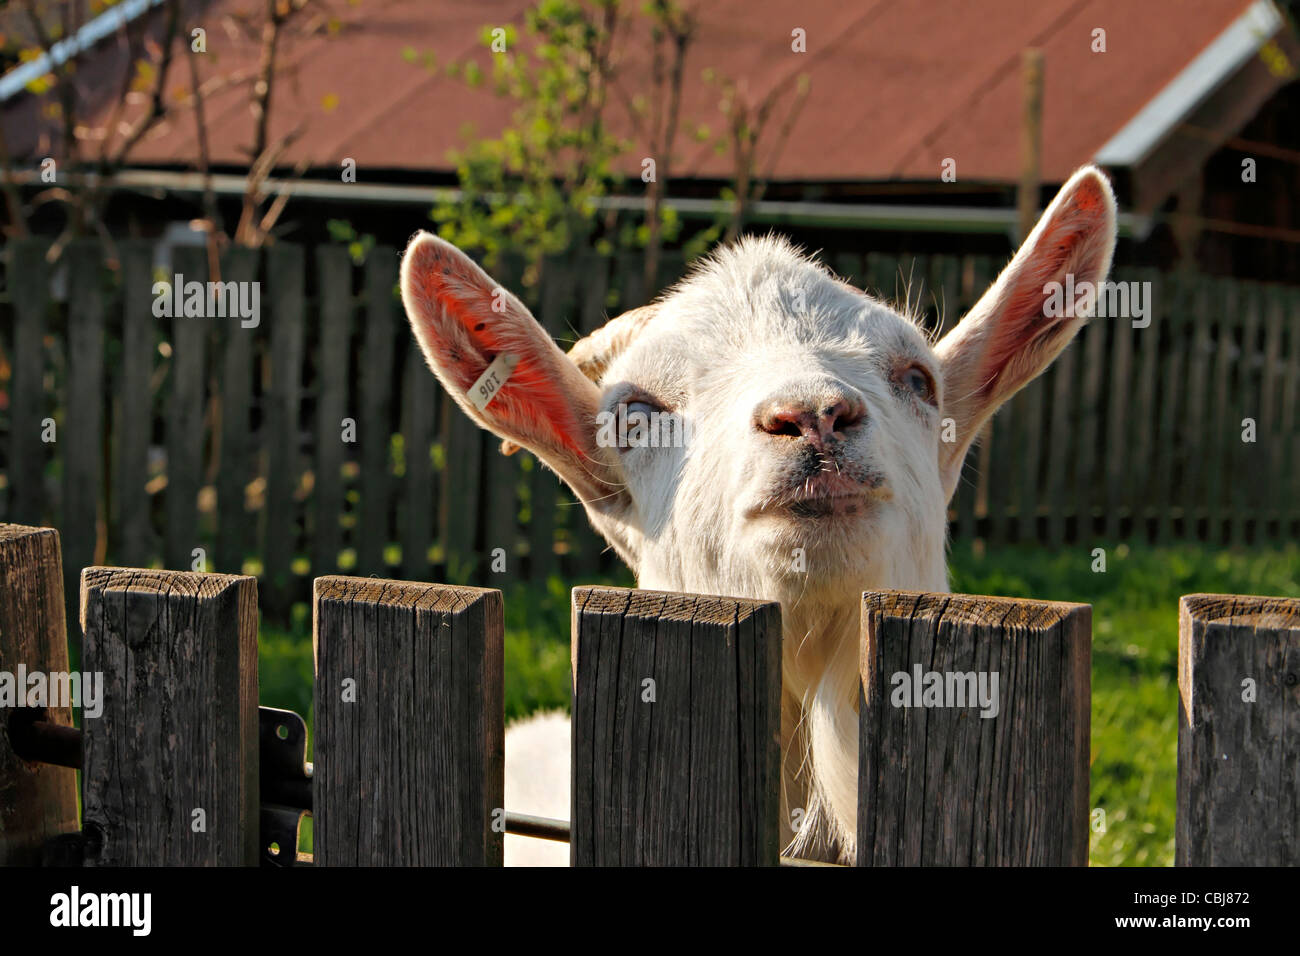 Portrait of a Goat looking over a wood gate, Chiemgau Upper Bavaria Germany Stock Photo